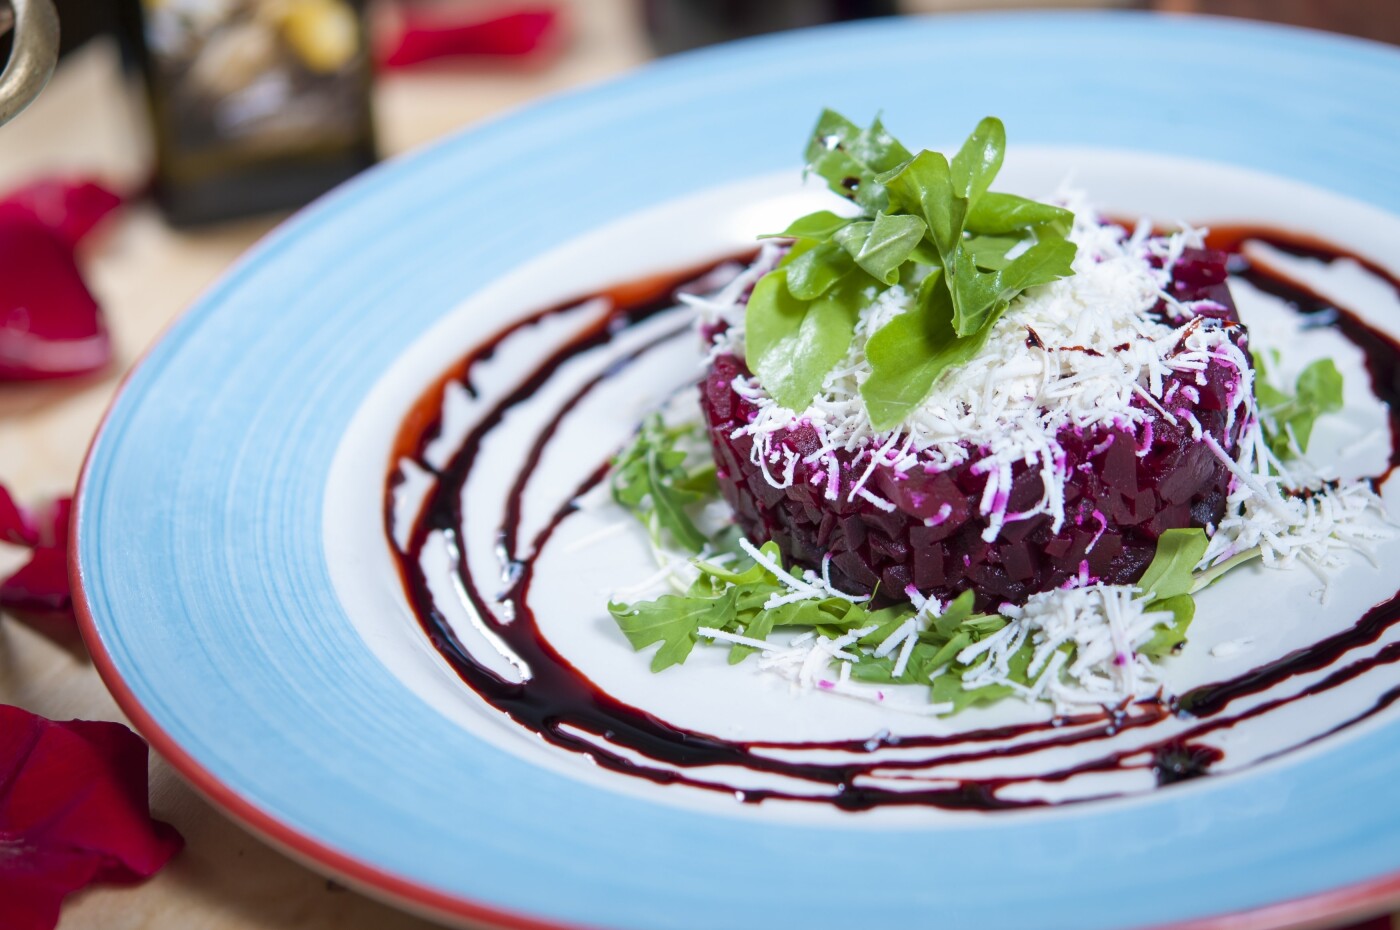 This is an image of an interesting beet tartare dish that I shot for a small Italian restaurant in South Miami. It's made with oven roasted beets, mache greens, and gorgonzola cheese in a champagne vinaigrette. Very tasty and well presented!